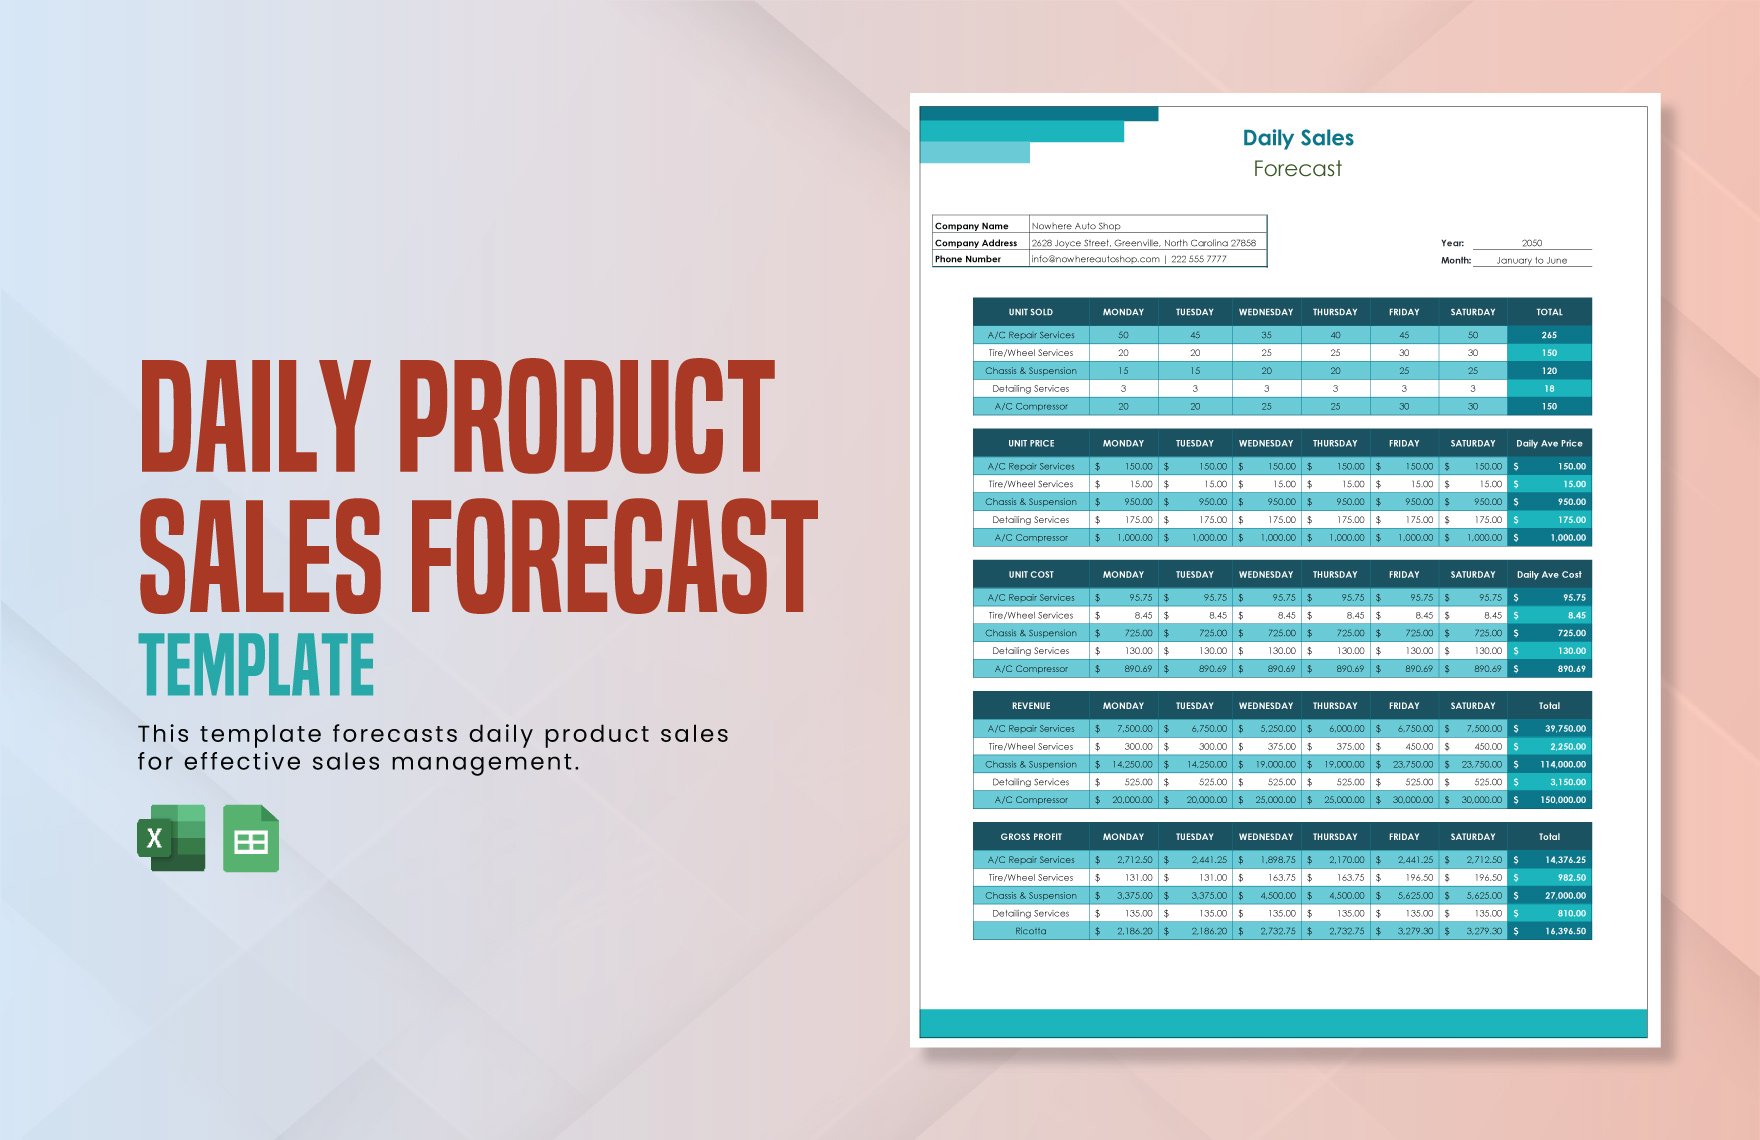 Daily Product Sales Forecast Template